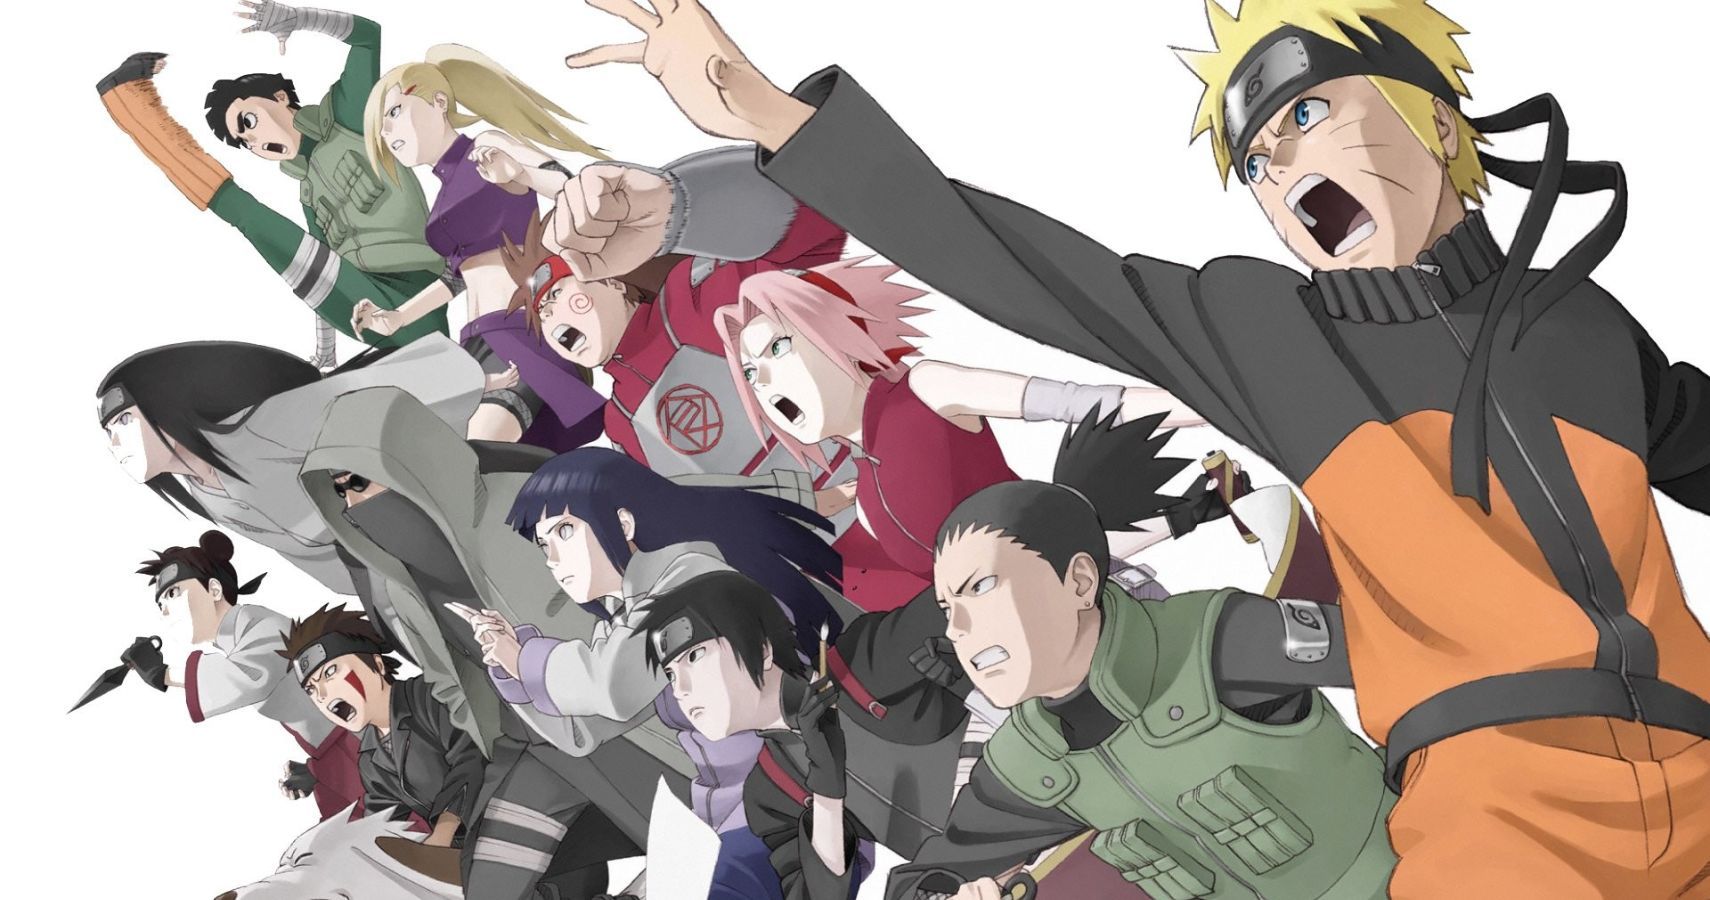 Naruto 10 Actors Who Should Play The Main Characters In A Live Action Movie